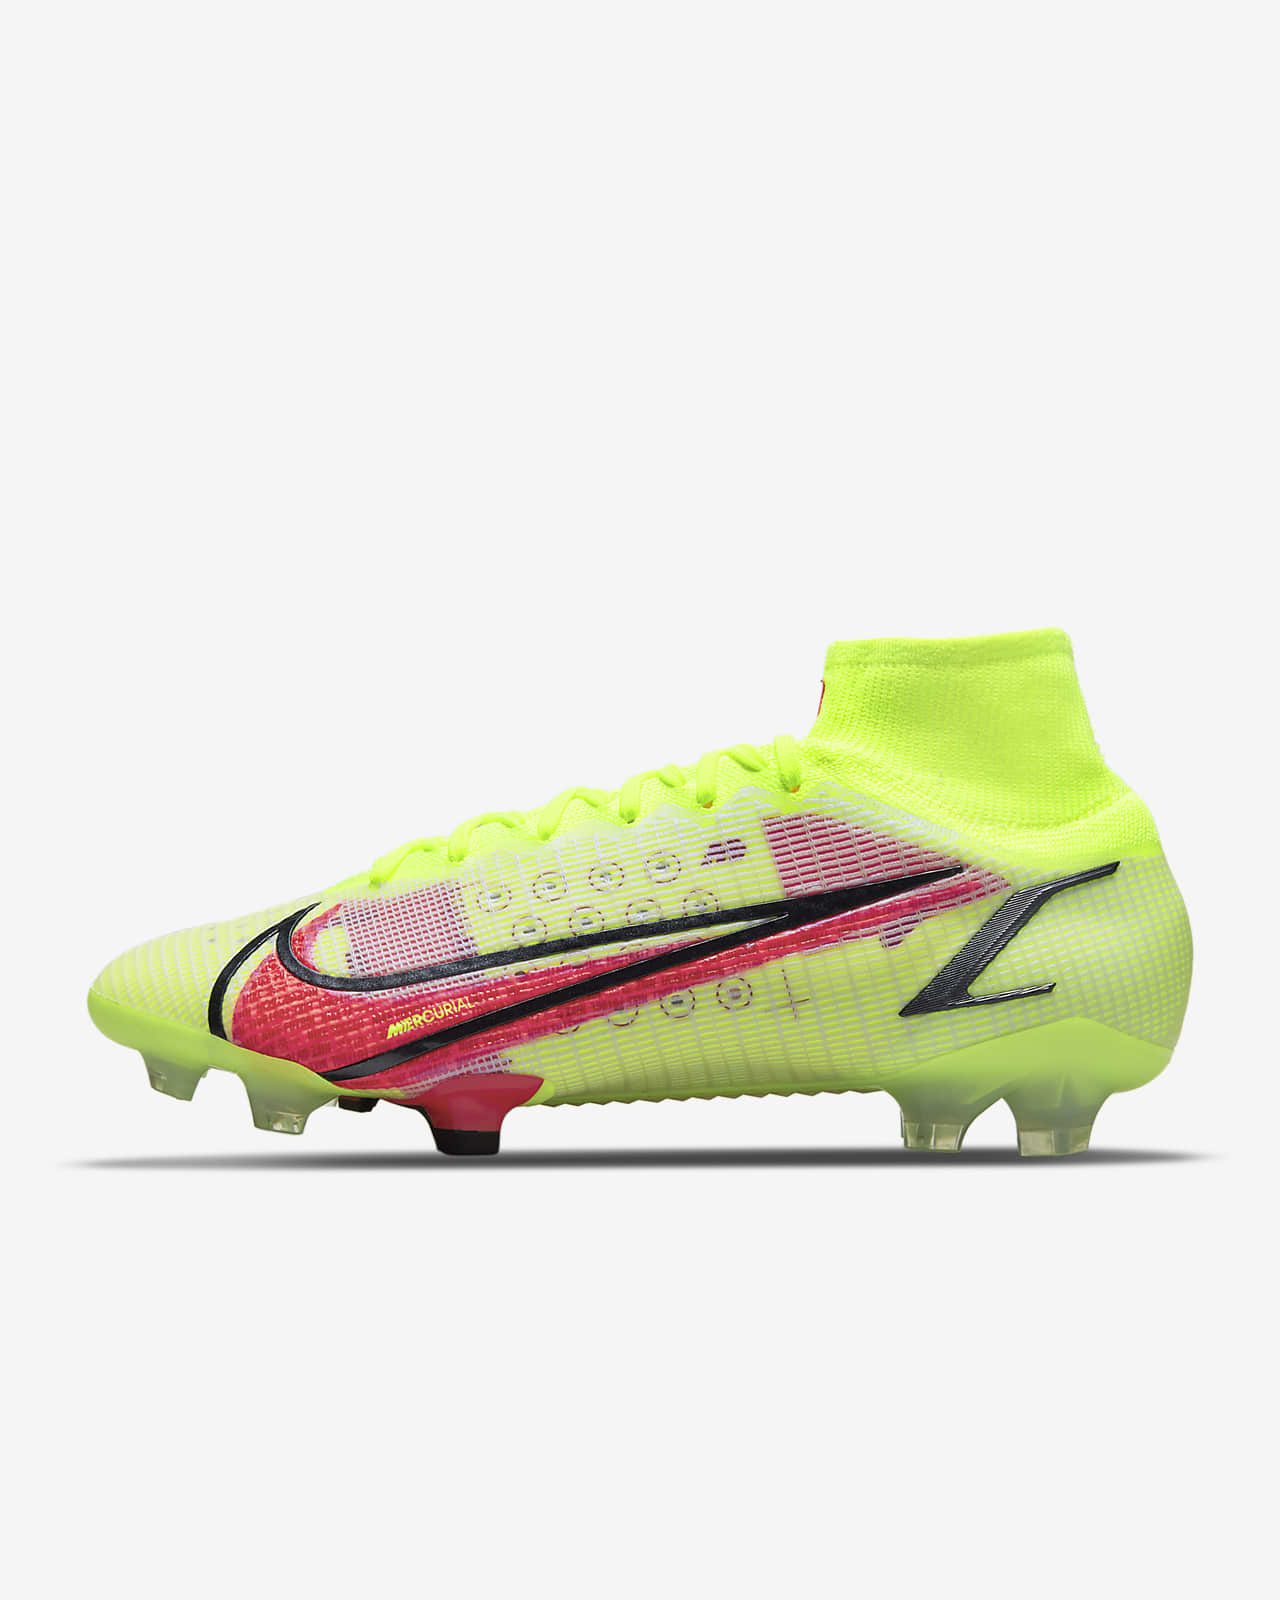 nike soccer cleats with sleeve